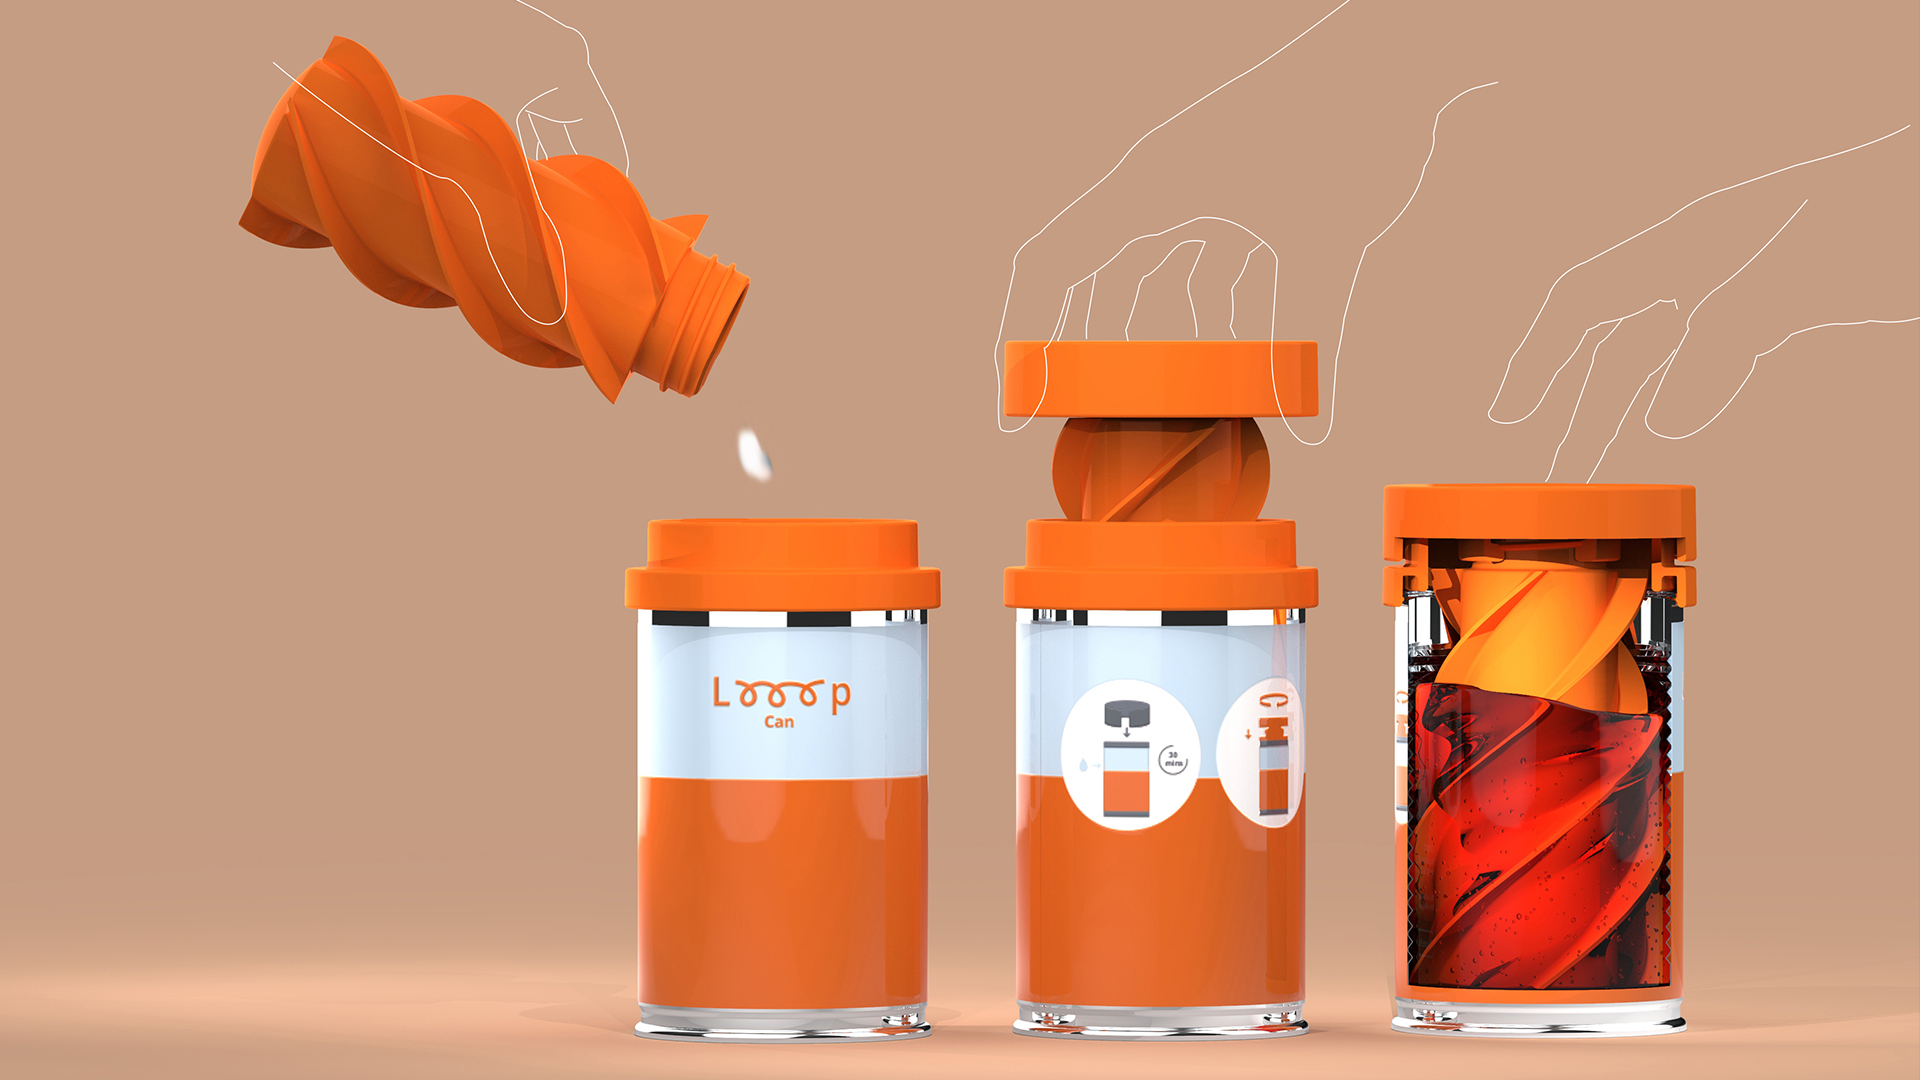 CAD image of three orange tins with liquid being poured in